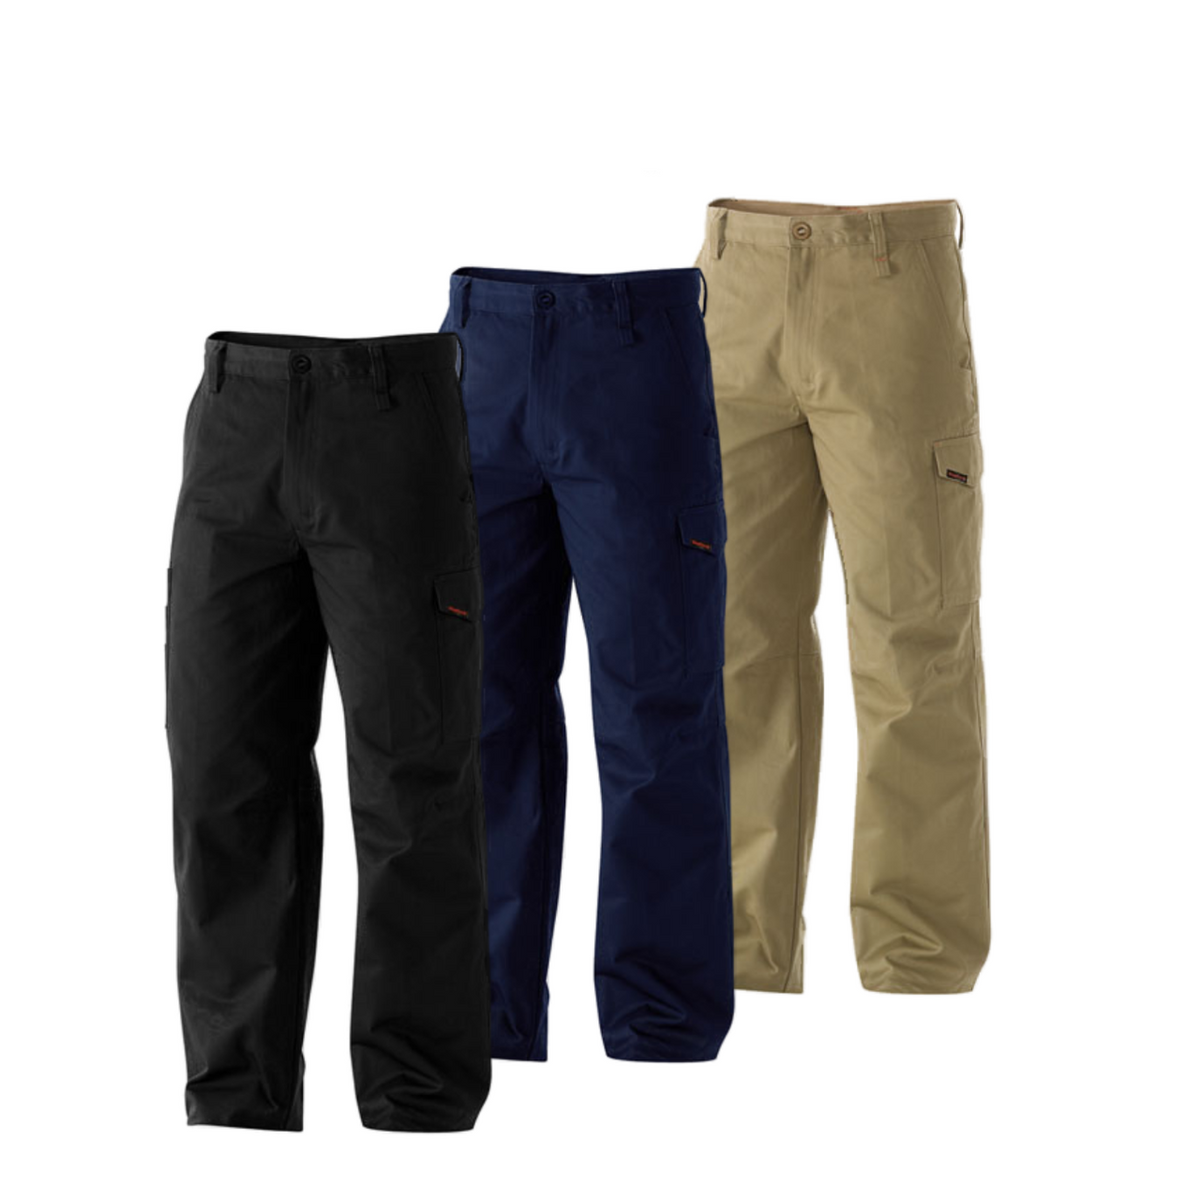 KingGee Mens Workcool Pants Modern Fit Cargo Tough Work Comfort Safety K13800-Collins Clothing Co